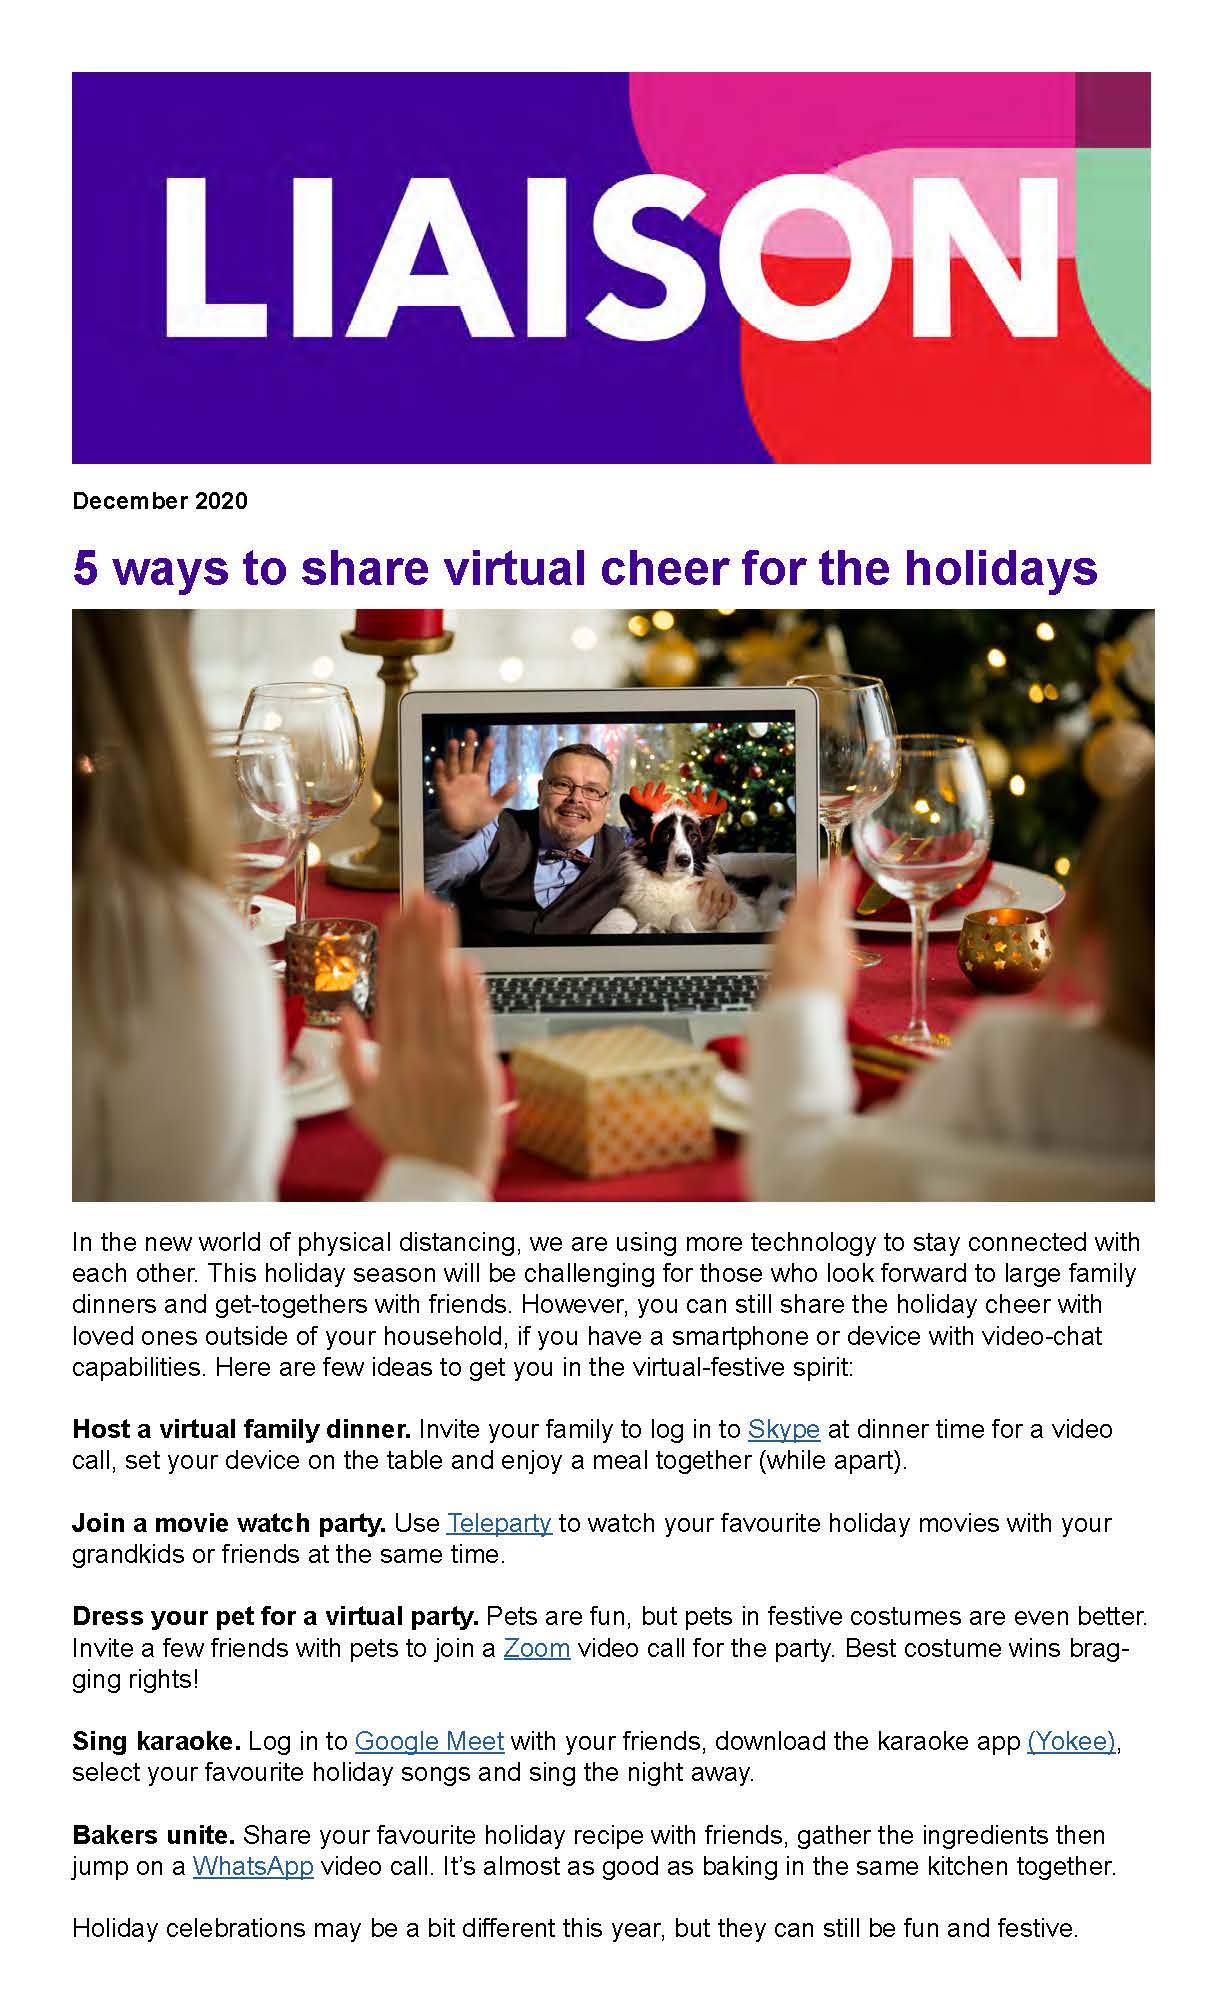 5 ways to share virtual cheer for the holidays